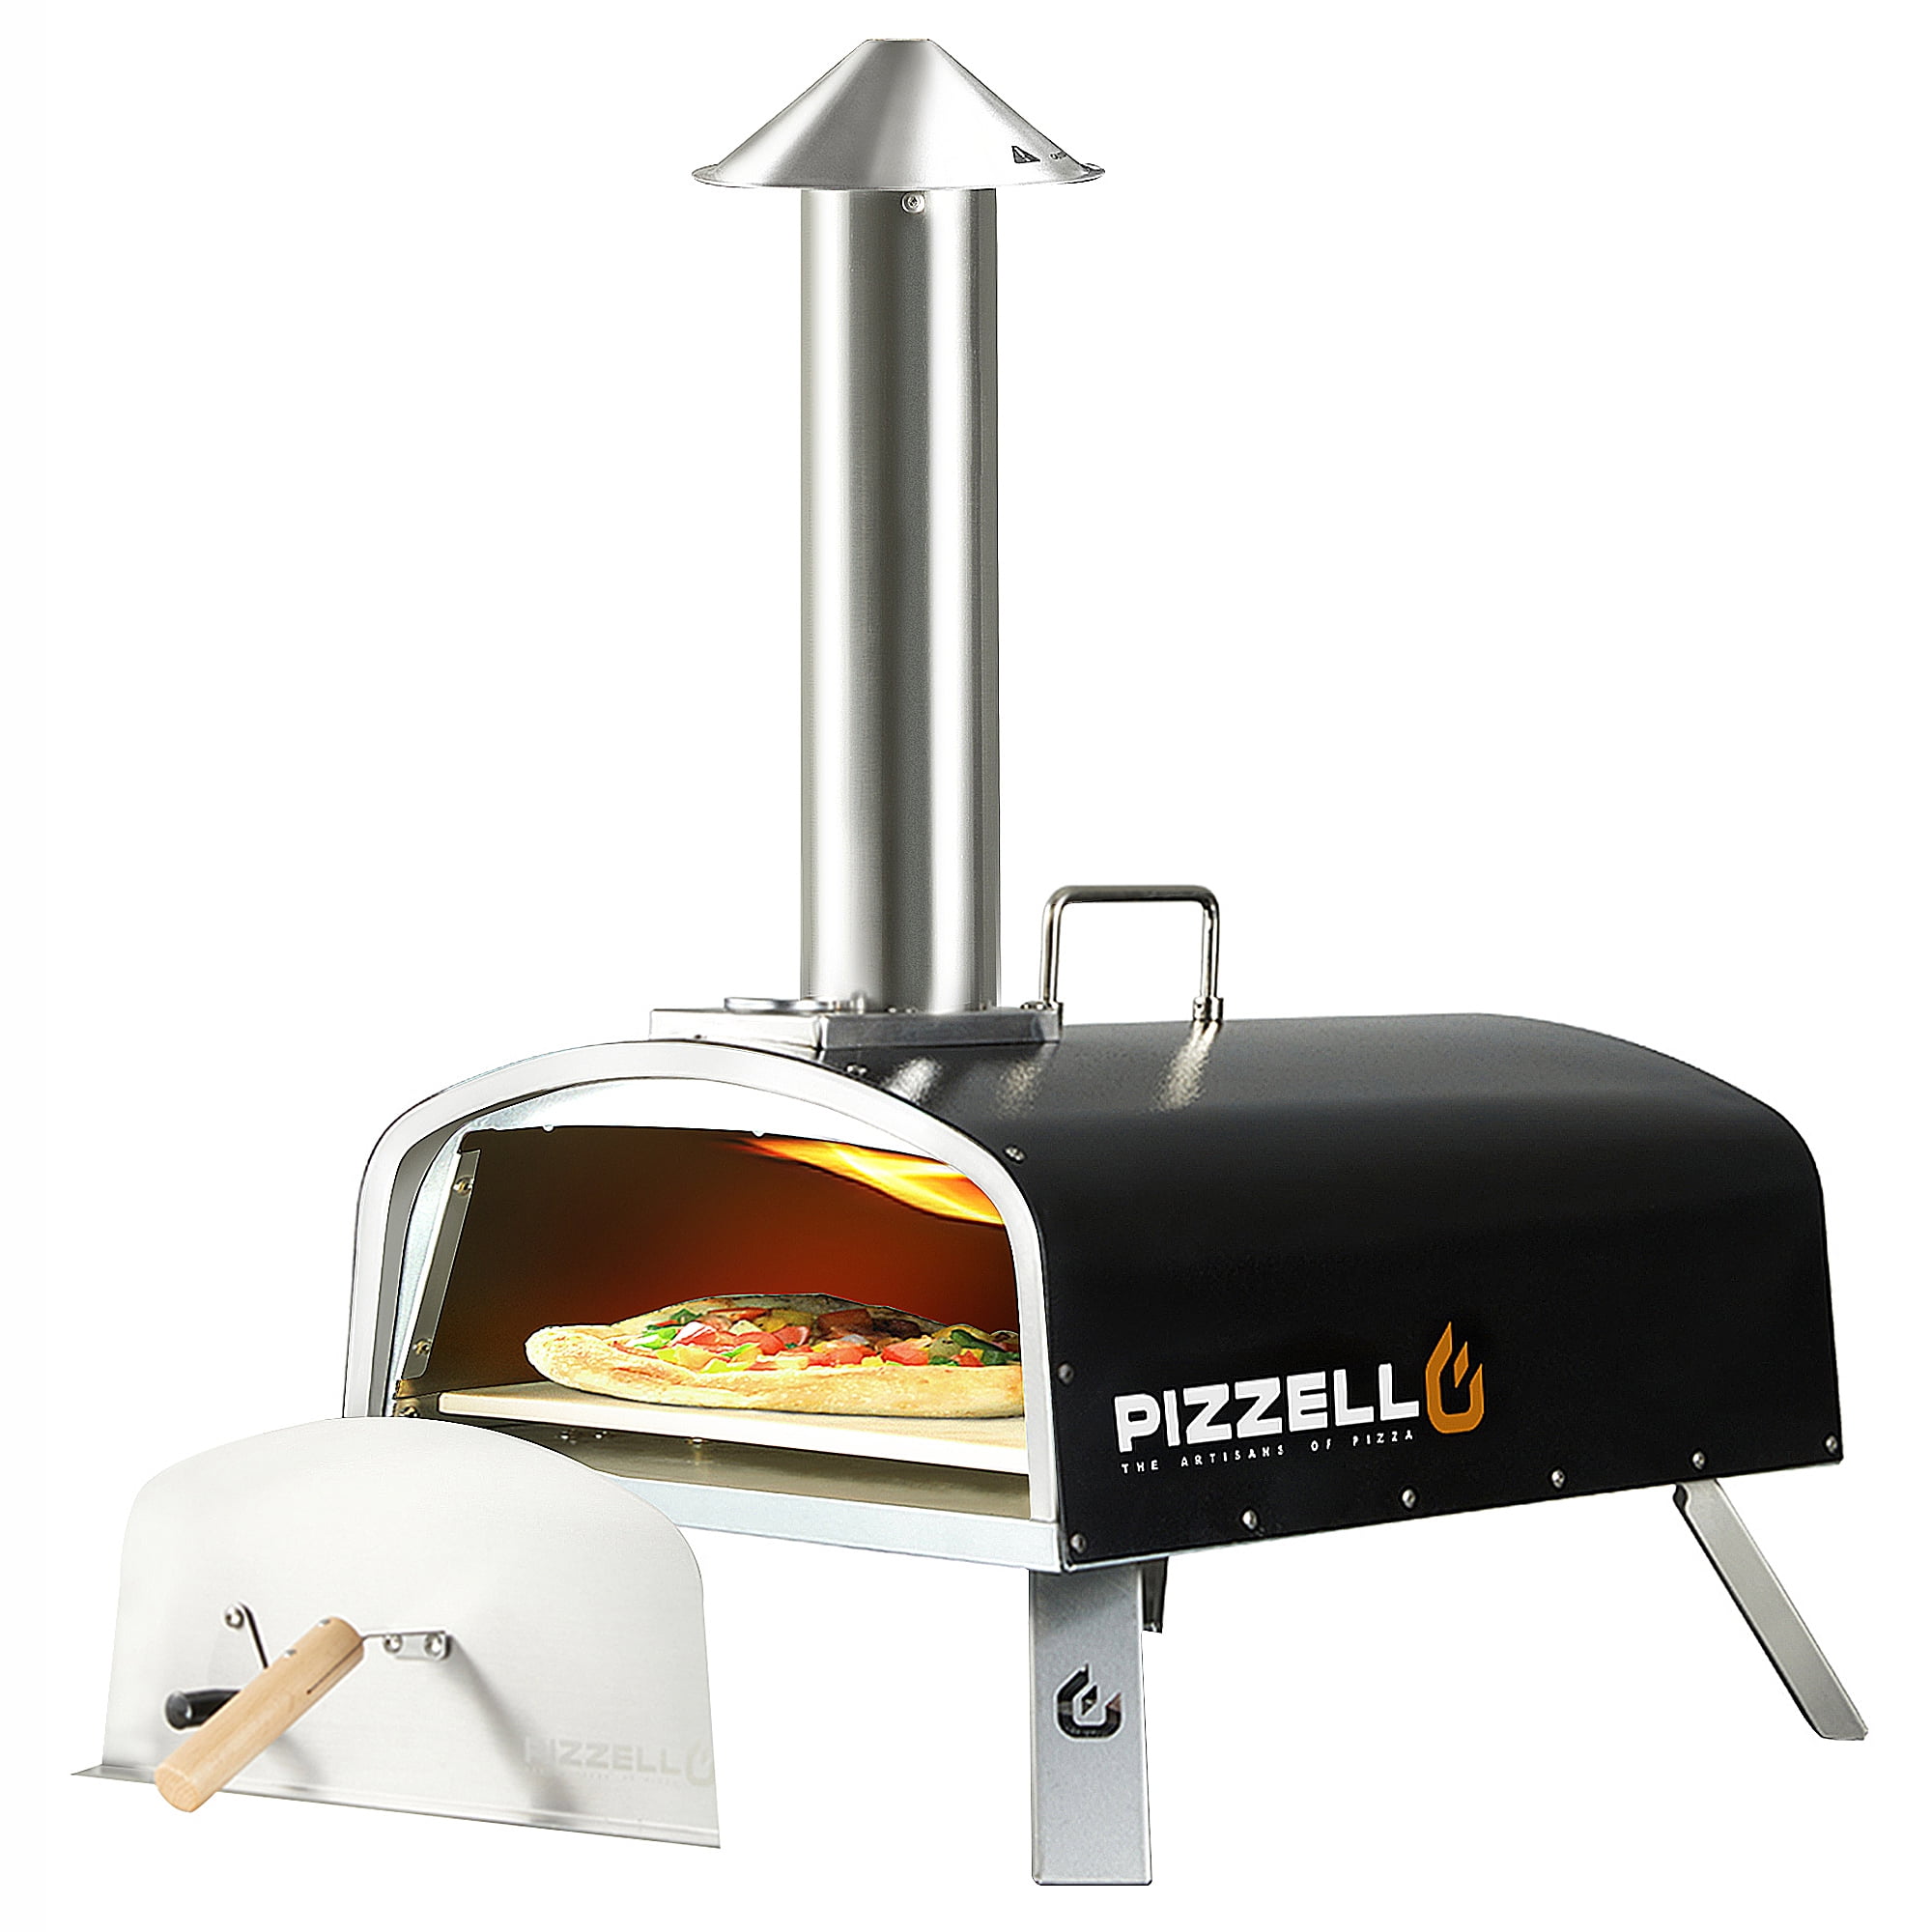 Ninja Woodfire 5-in-1 Outdoor Oven, 700F High Heat Roaster, Artisan Pizza Oven, Foolproof BBQ Smoker with Woodfire Technology, Electric, OO100